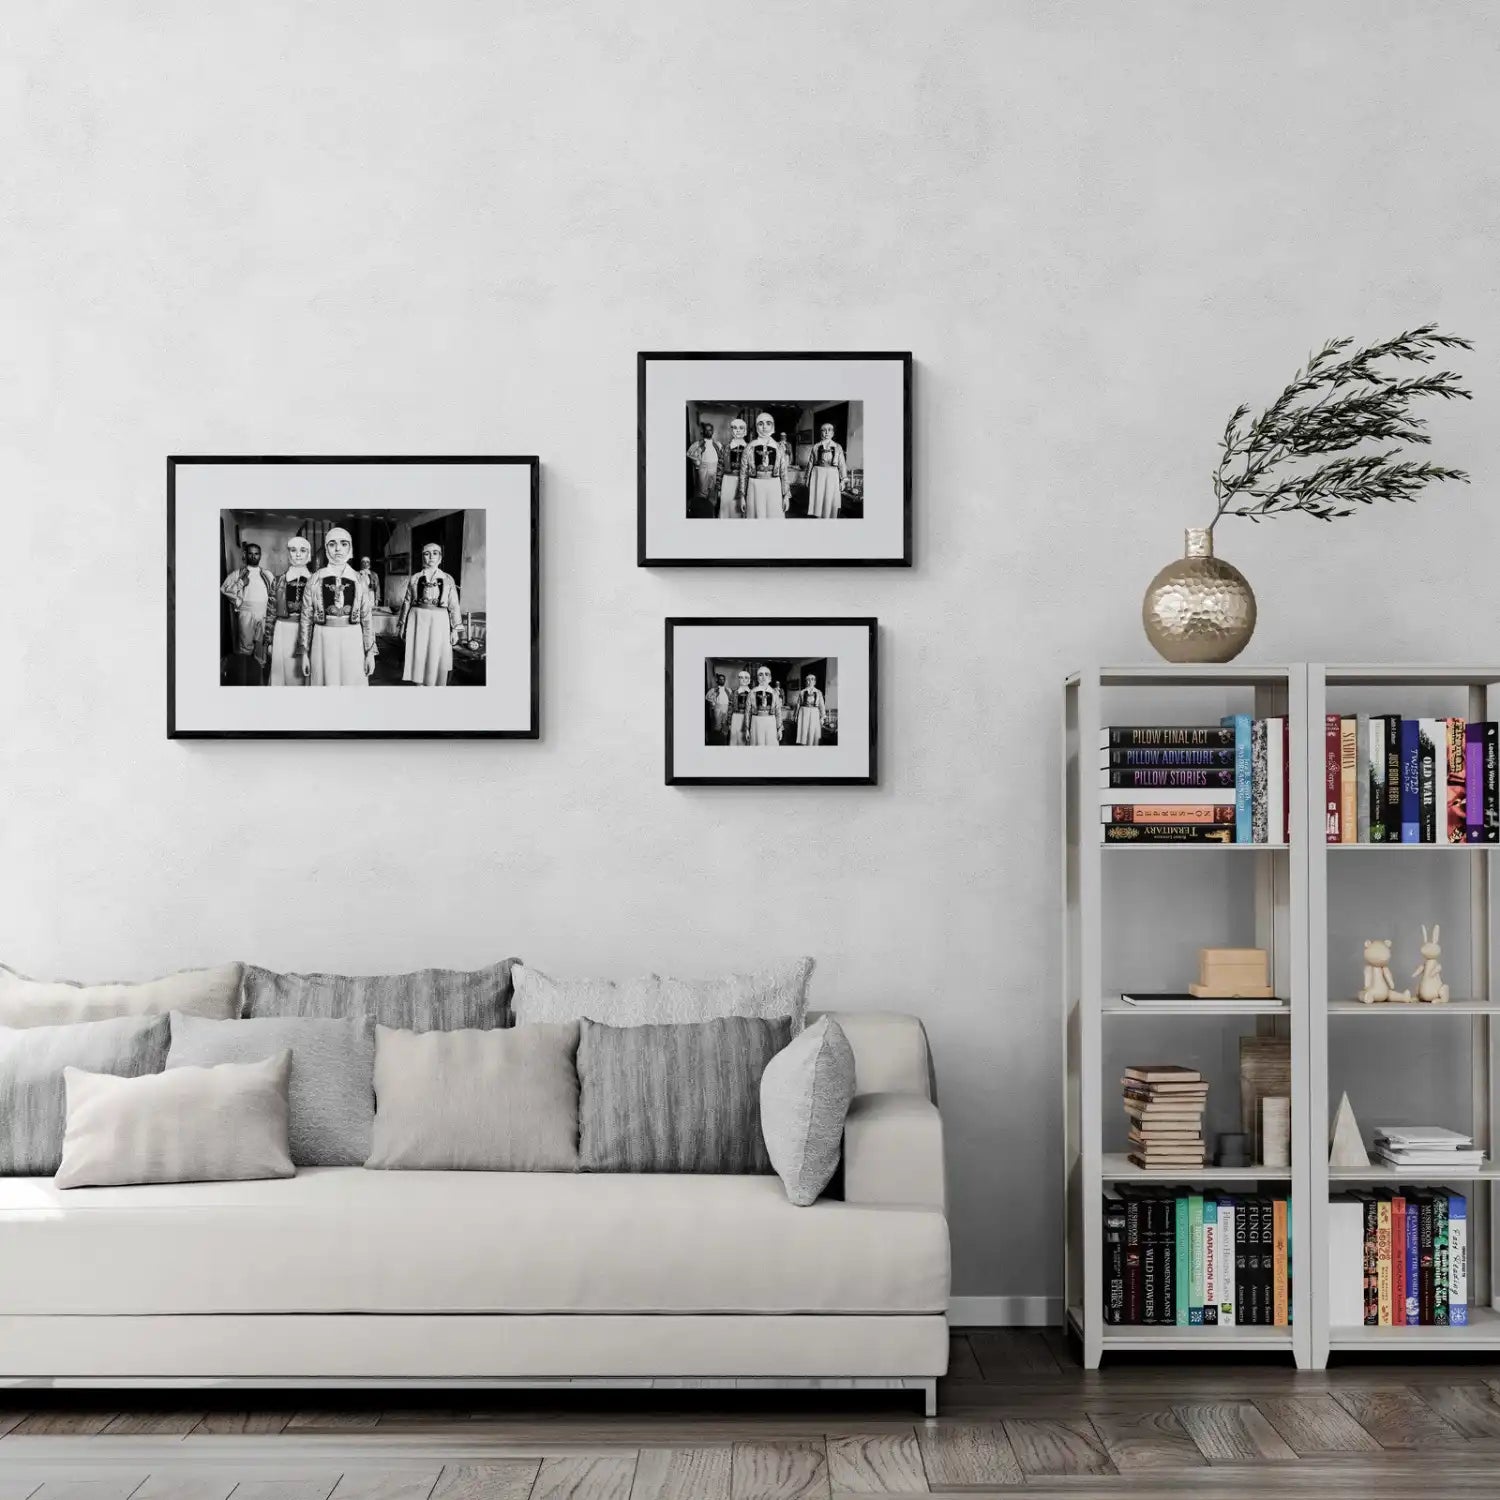 Paleopyrgos, Pogoni, Epirus, Greece | Costumes in Local House | Black-and-White Wall Art Photography - framing options